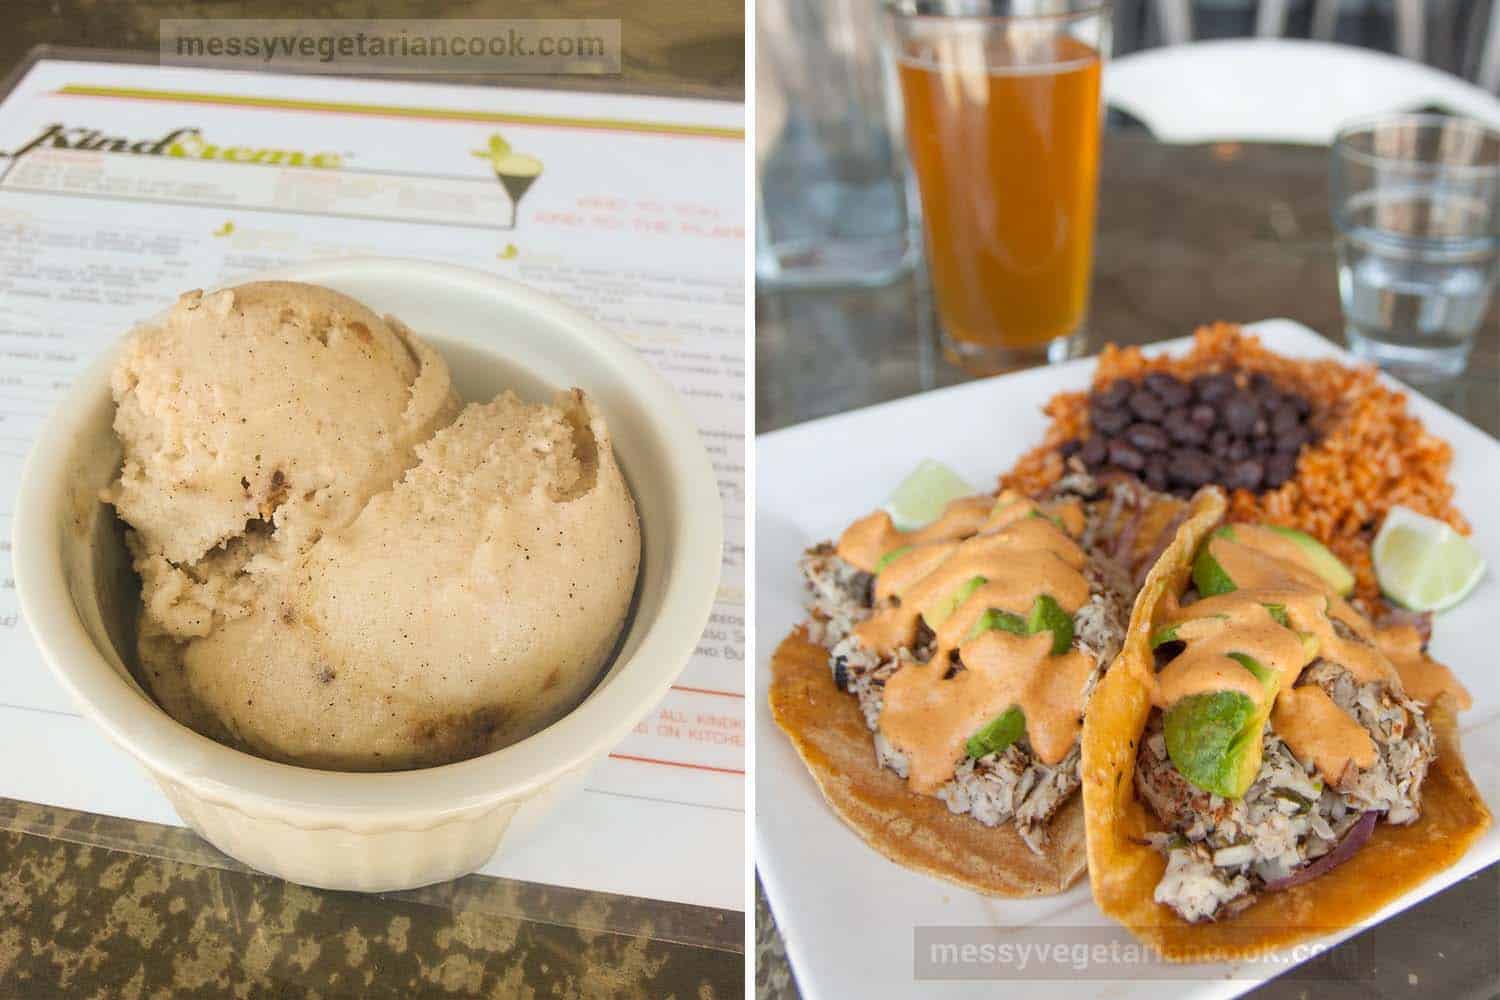 KindKreme ice cream and fish tacos from Sage Organic Vegan Bistro in Culver City